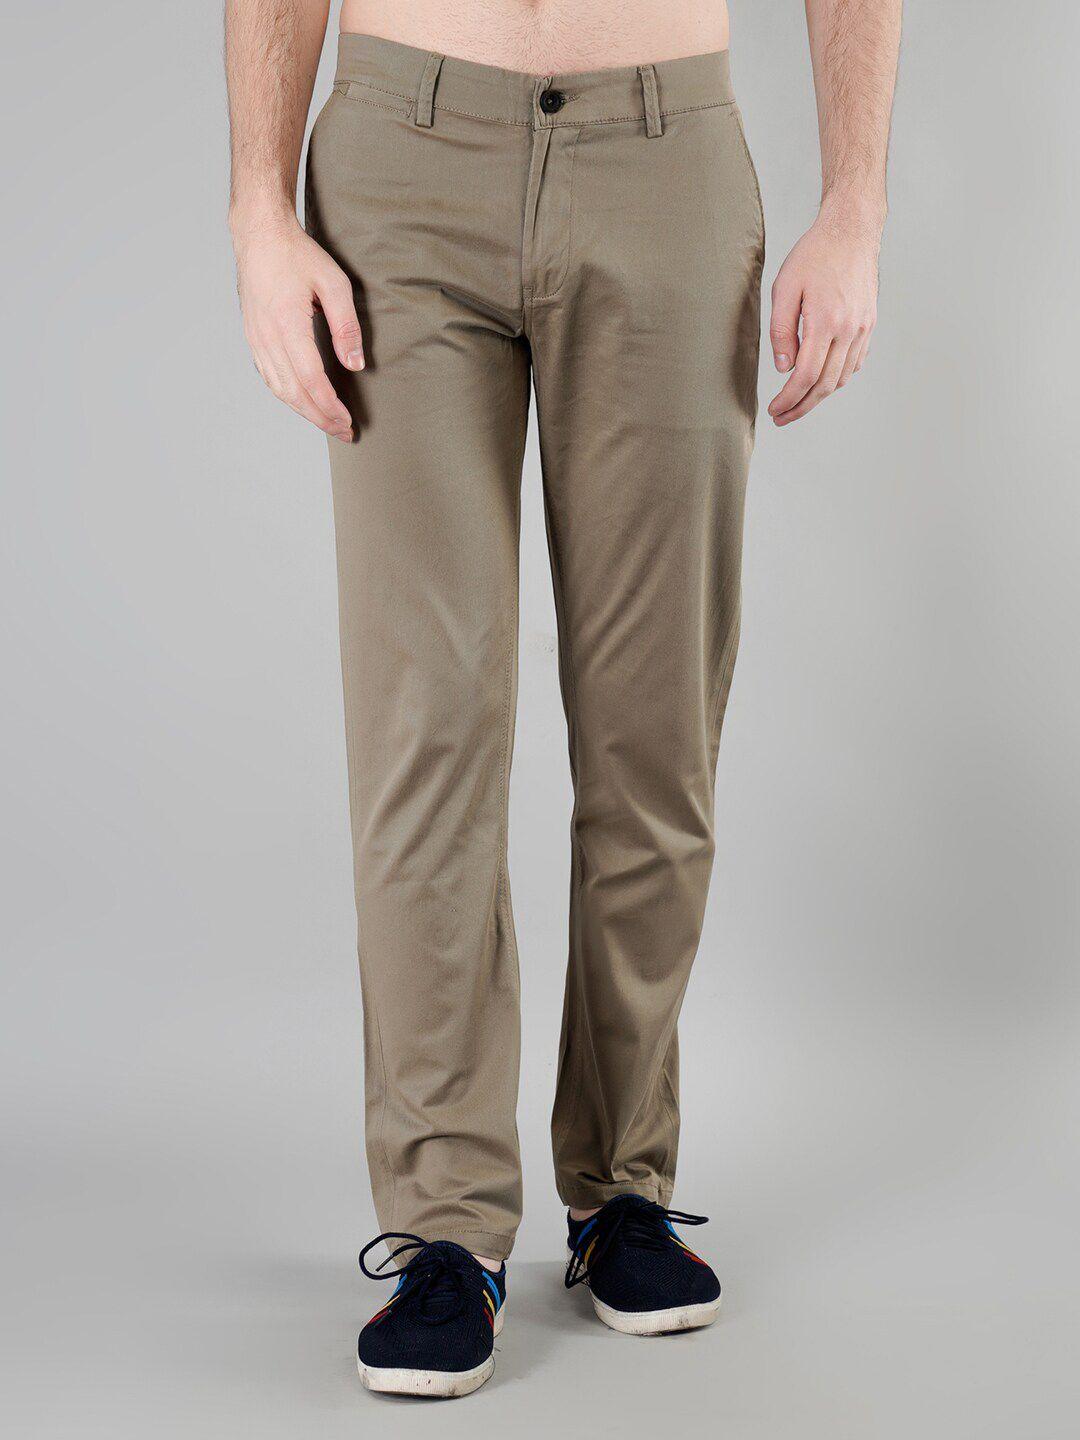 TIM PARIS Men Relaxed Easy Wash Stretchable Cotton Chinos Trousers